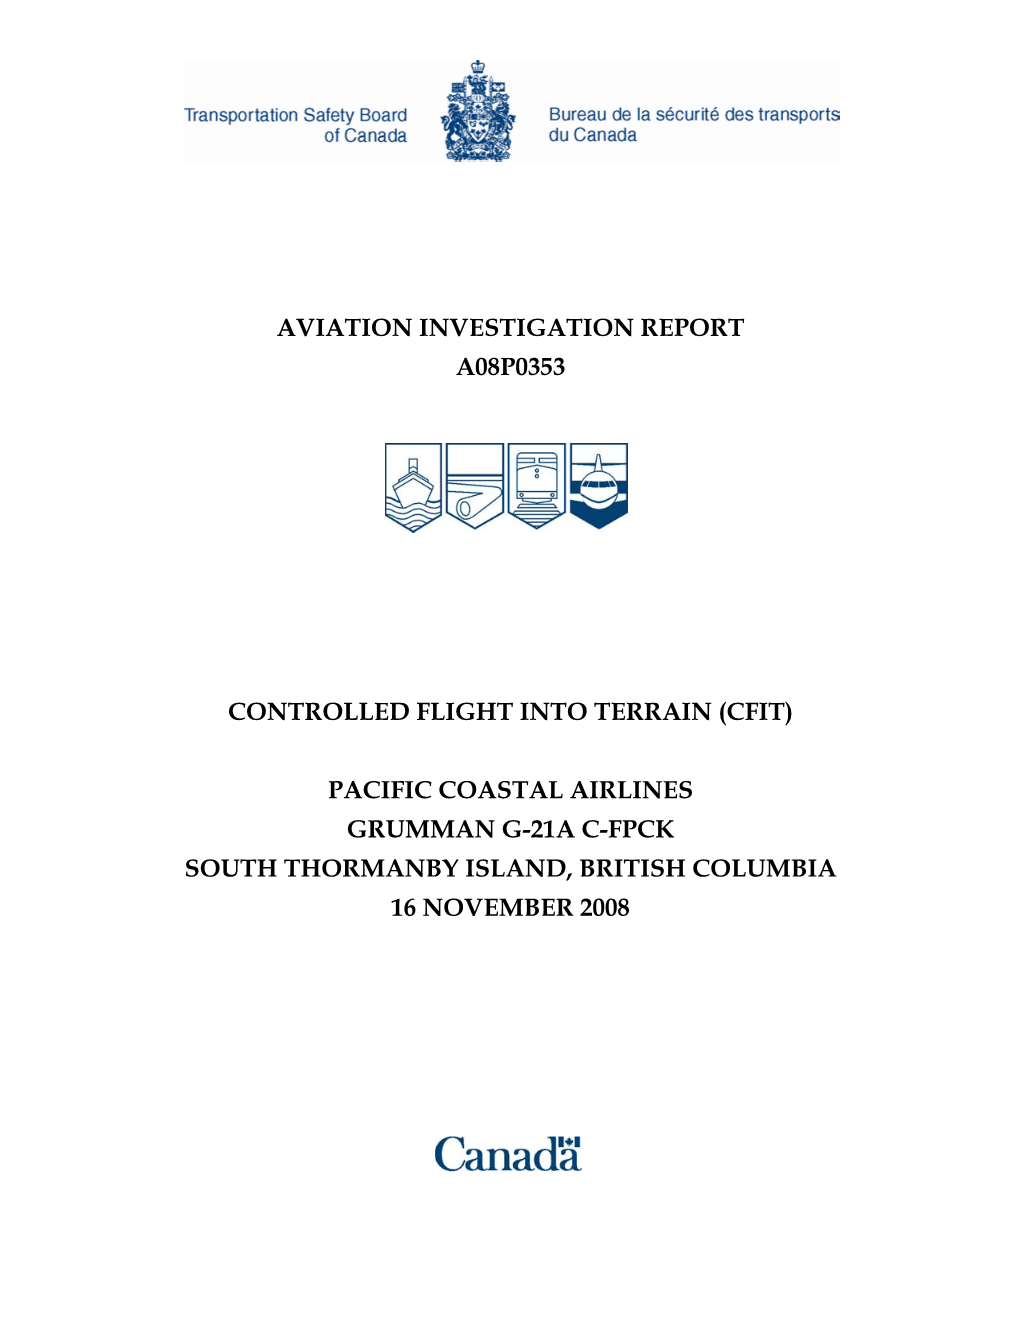 Aviation Investigation Report A08p0353 Controlled Flight